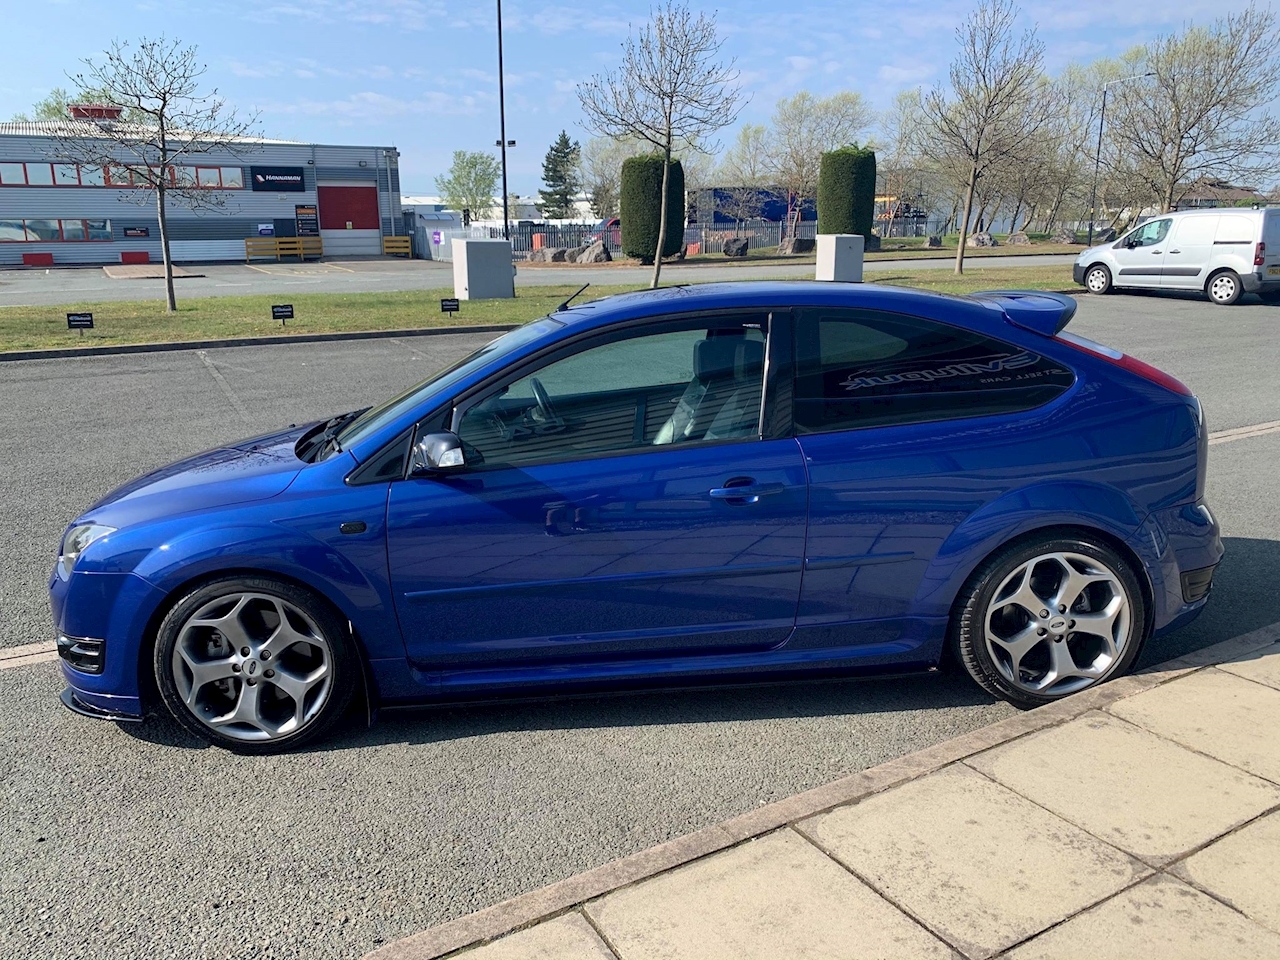 Used 2006 Ford Focus St-3 Hatchback 2.5 Manual Petrol For Sale in ...